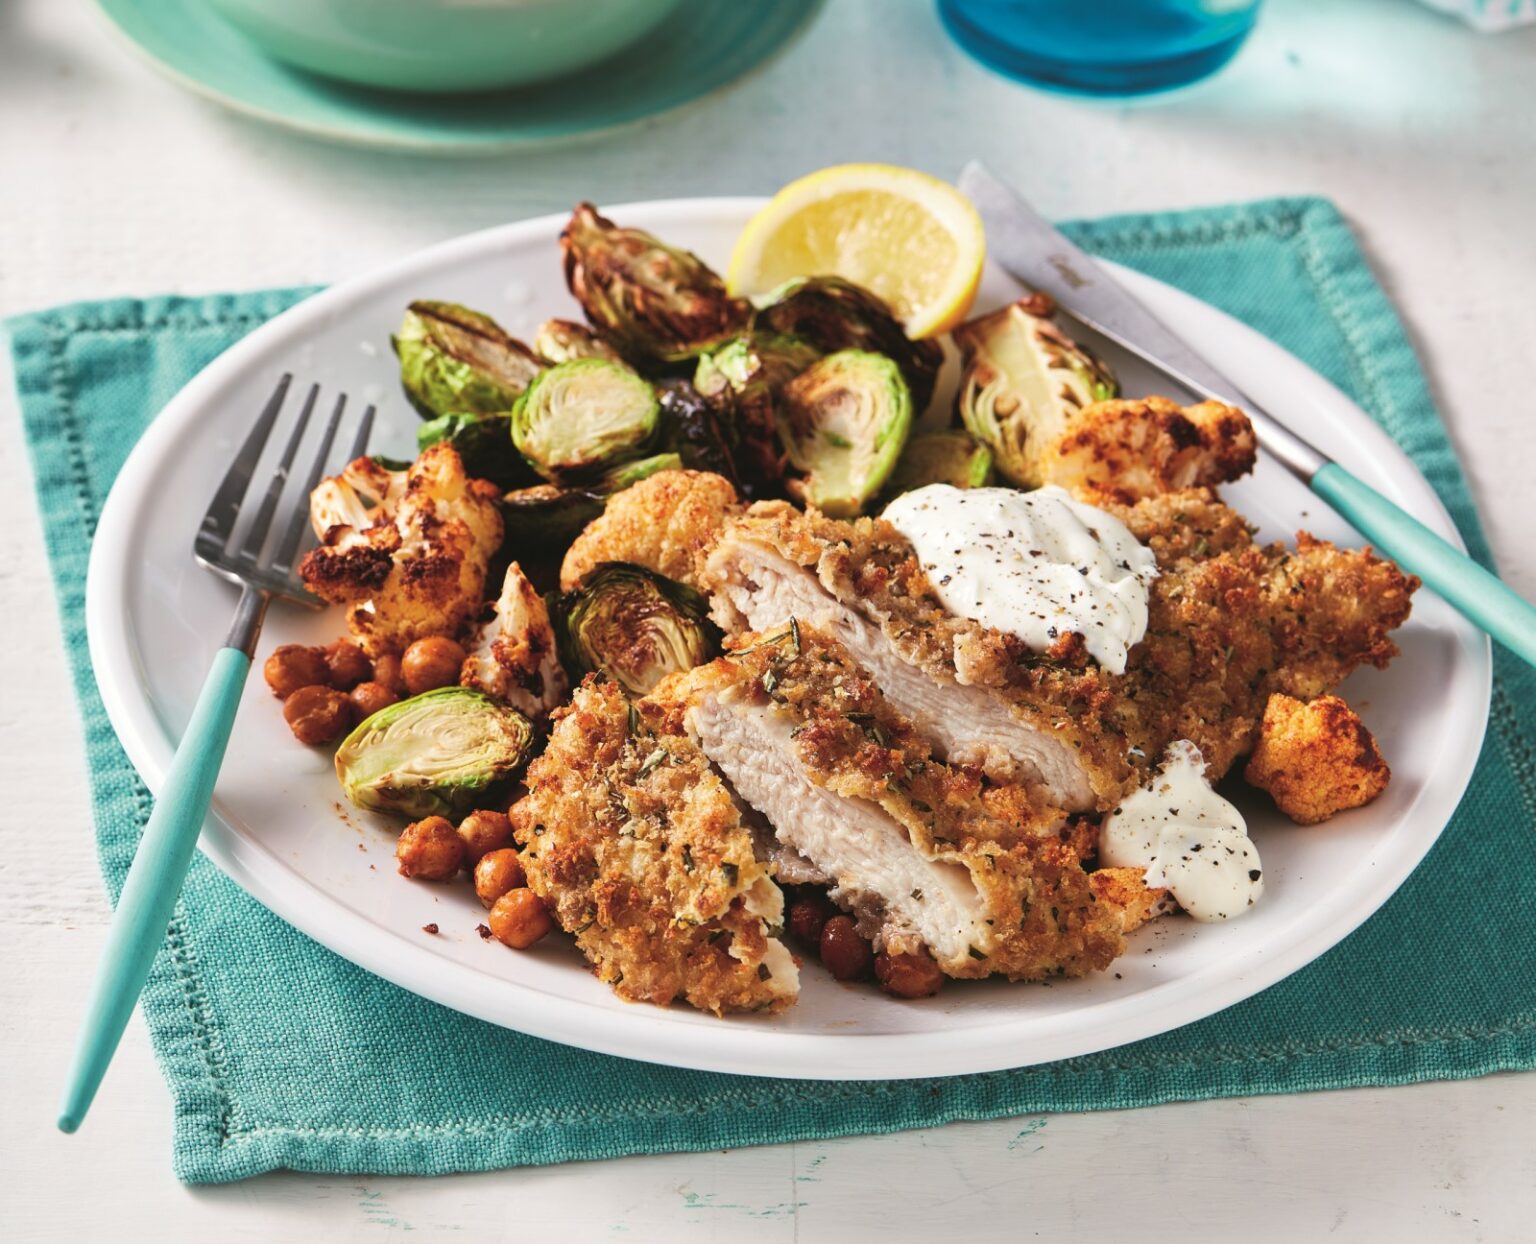 Air-fryer rosemary and rye crumbed chicken schnitzel with crispy Brussels sprouts